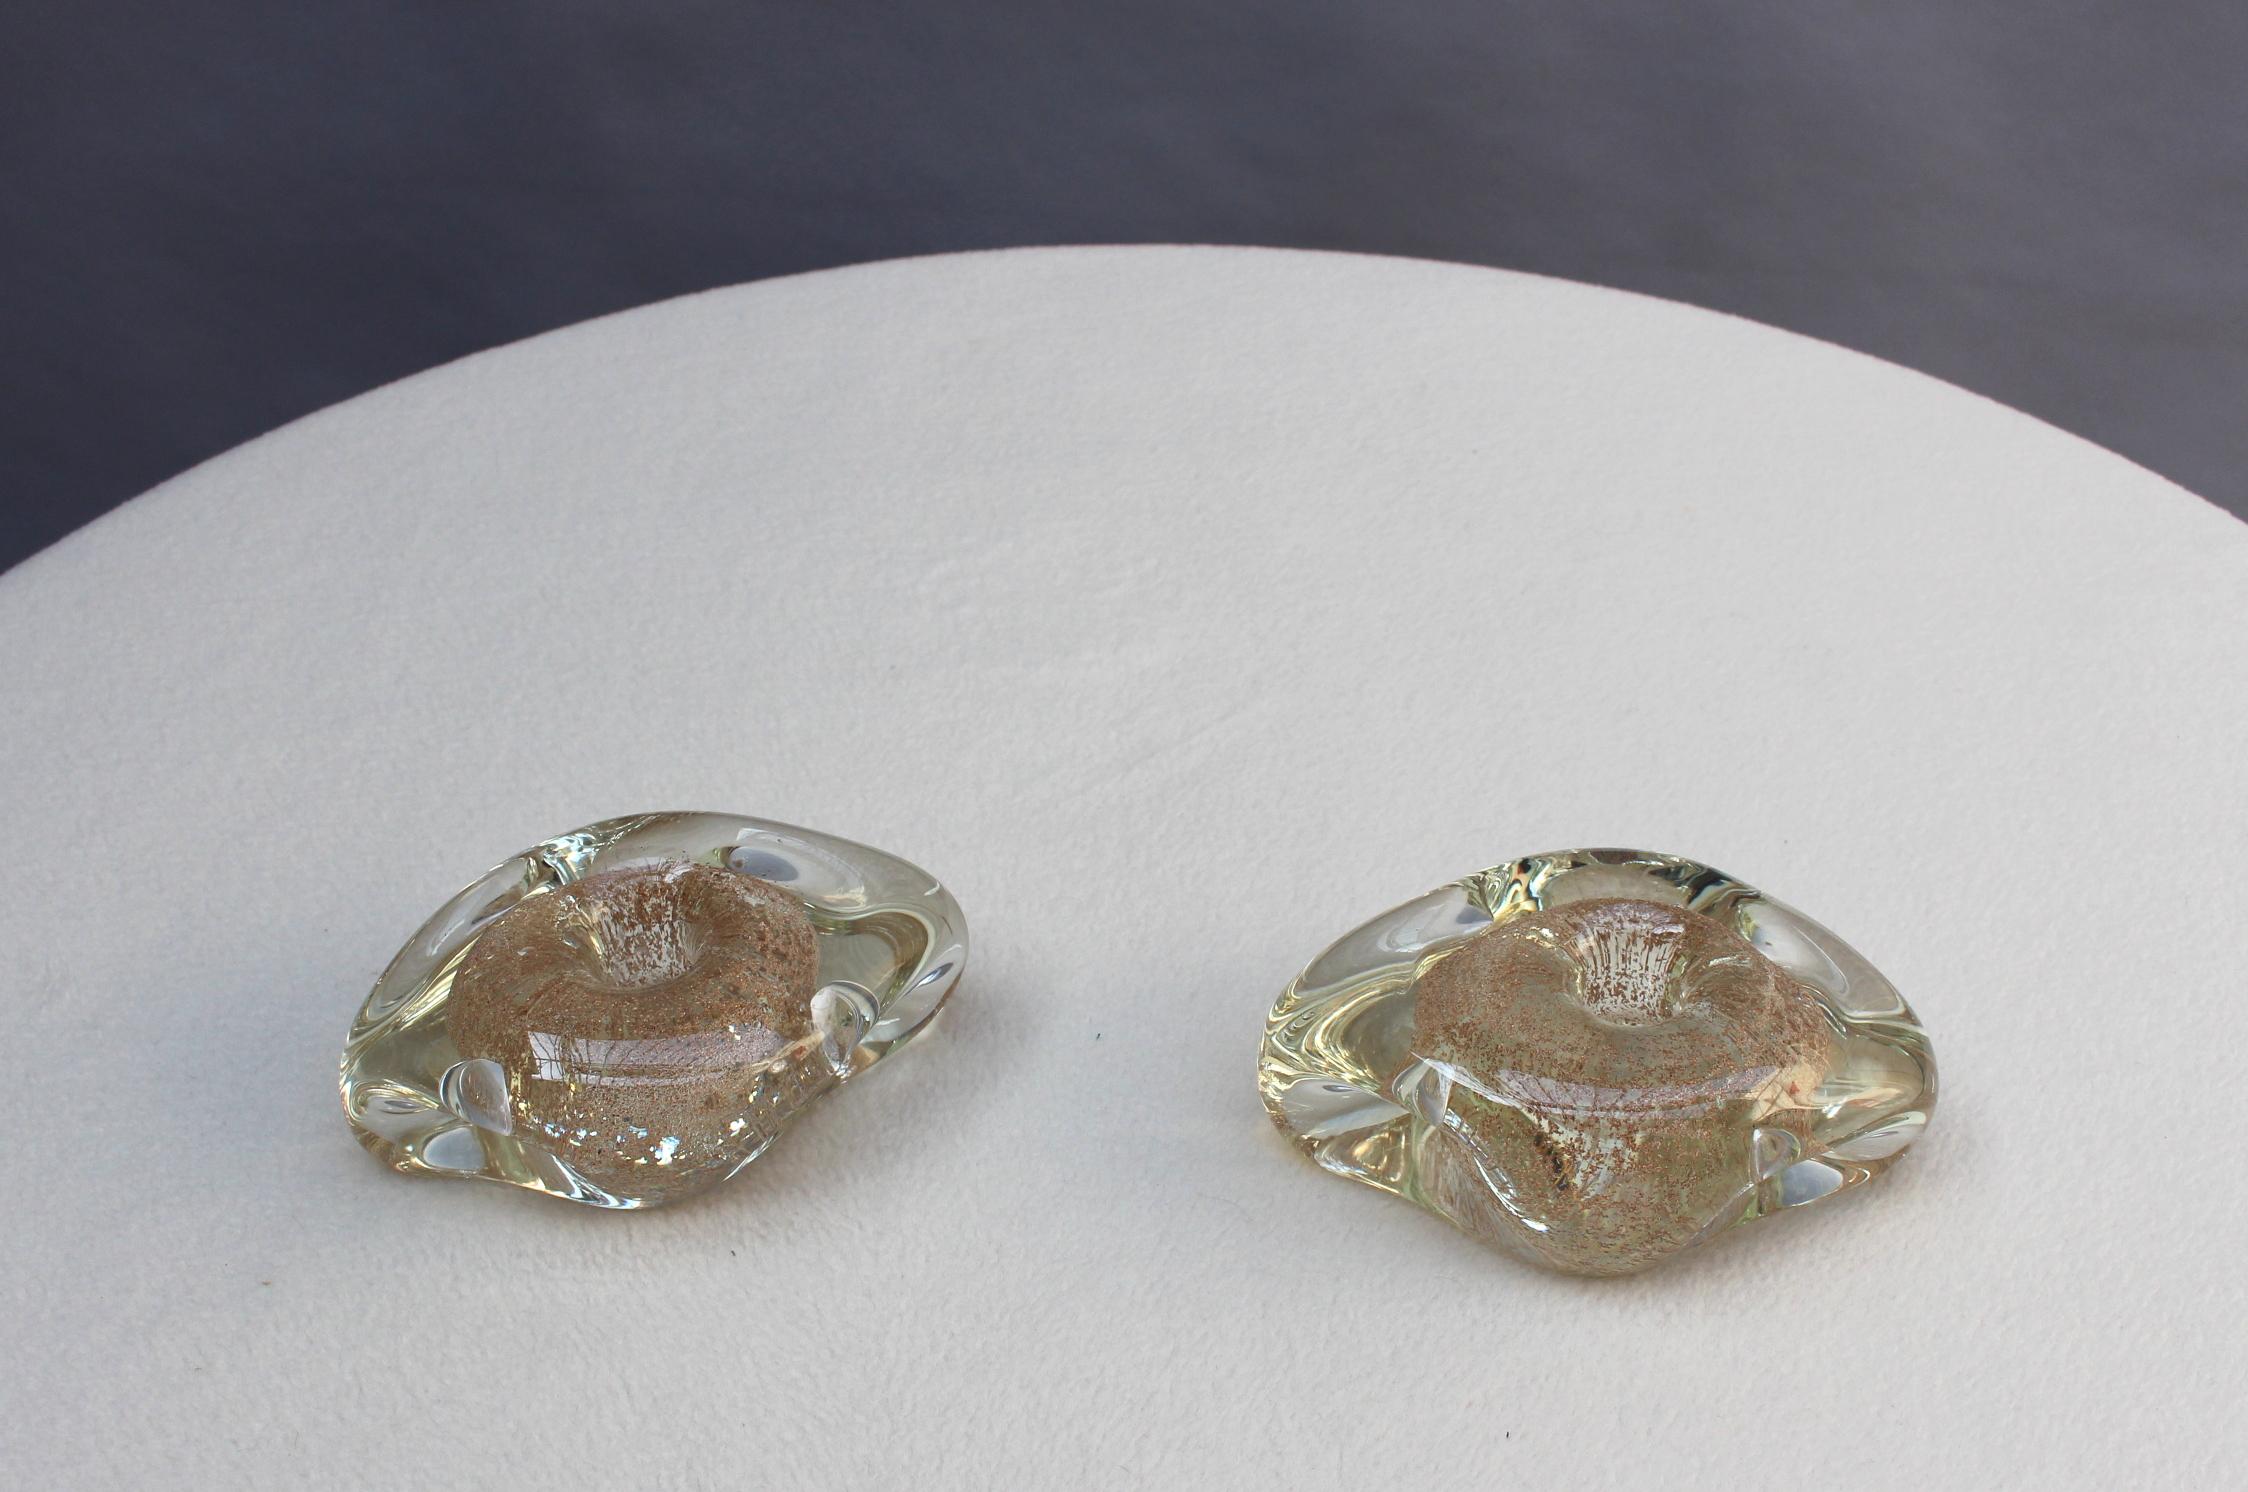 Two Handblown Glass Candlestick Holders by Andre Thuret (sold as a pair)   For Sale 5